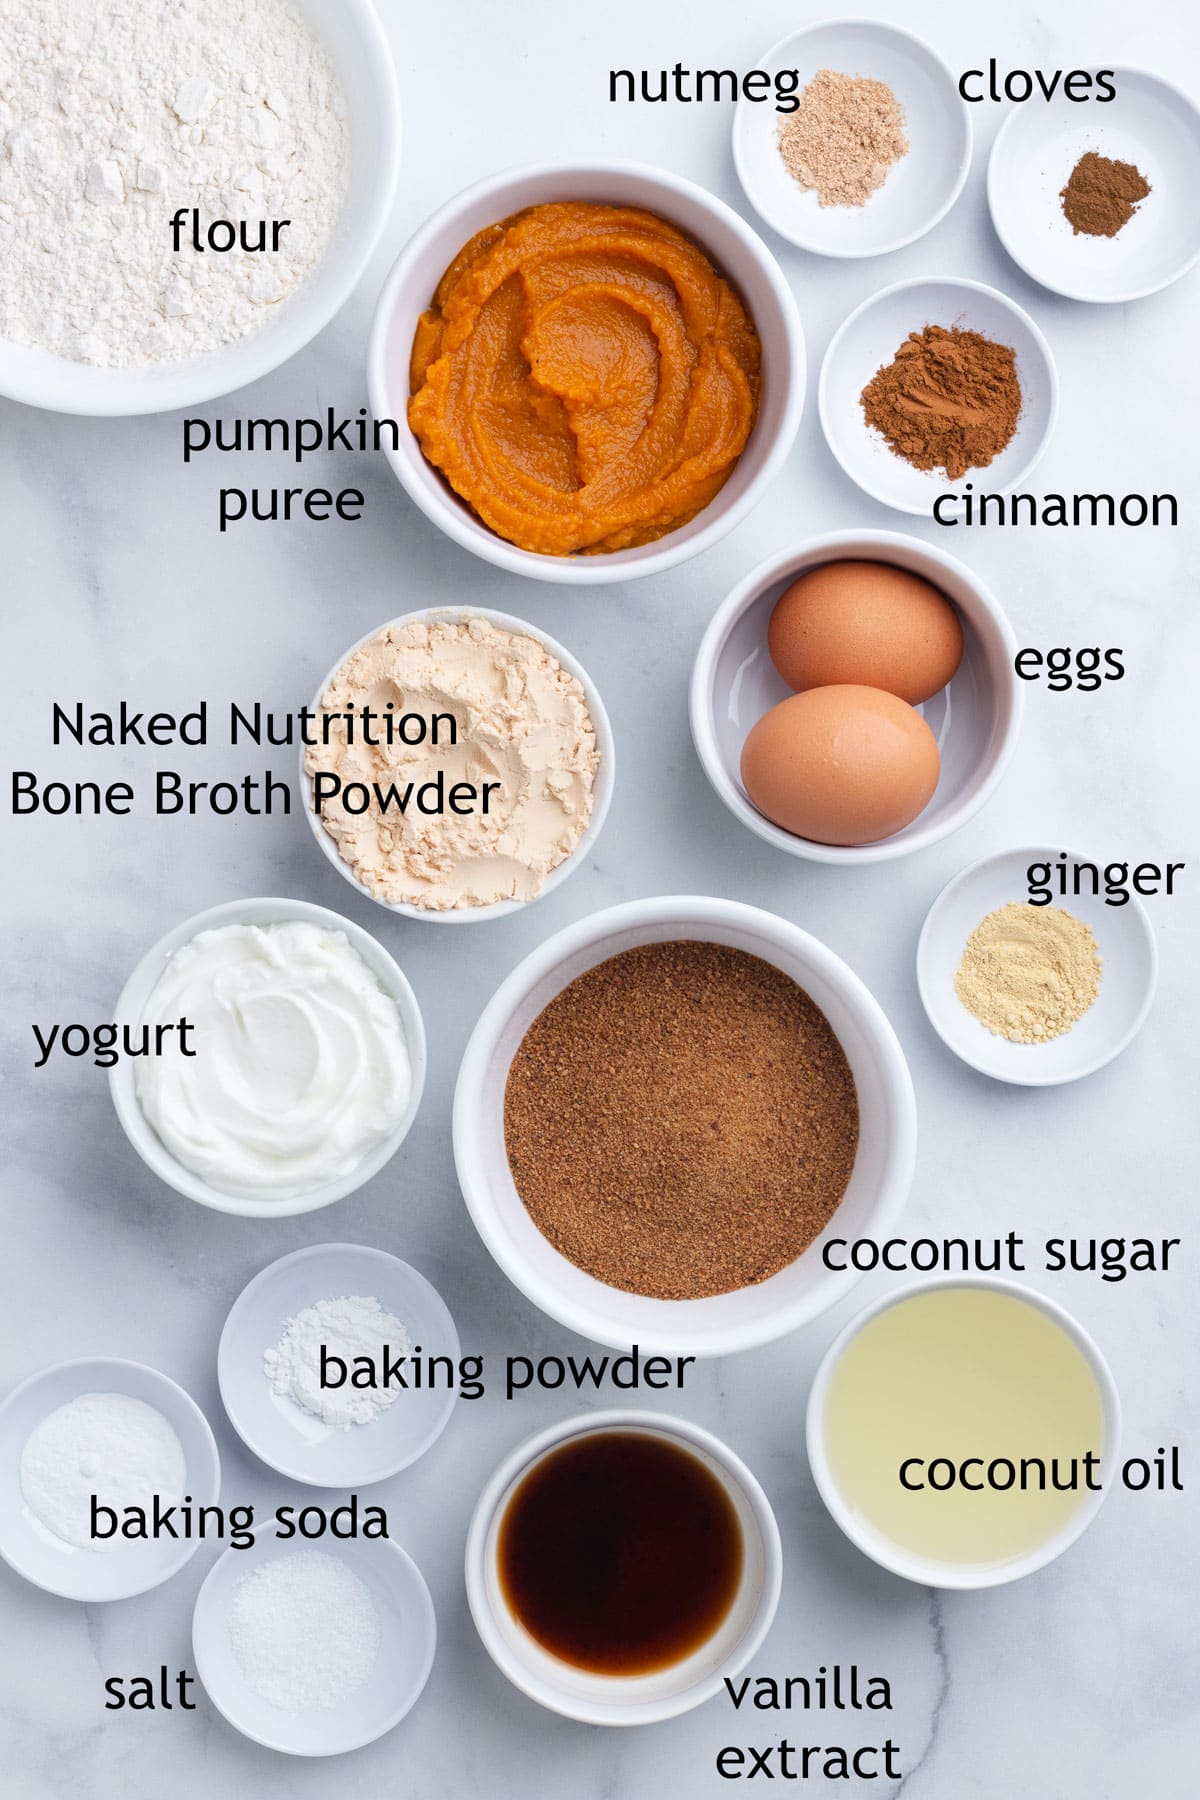 Ingredients for muffins including flour, pumpkin puree, spices, protein powder, eggs, coconut sugar, coconut oil and yogurt.